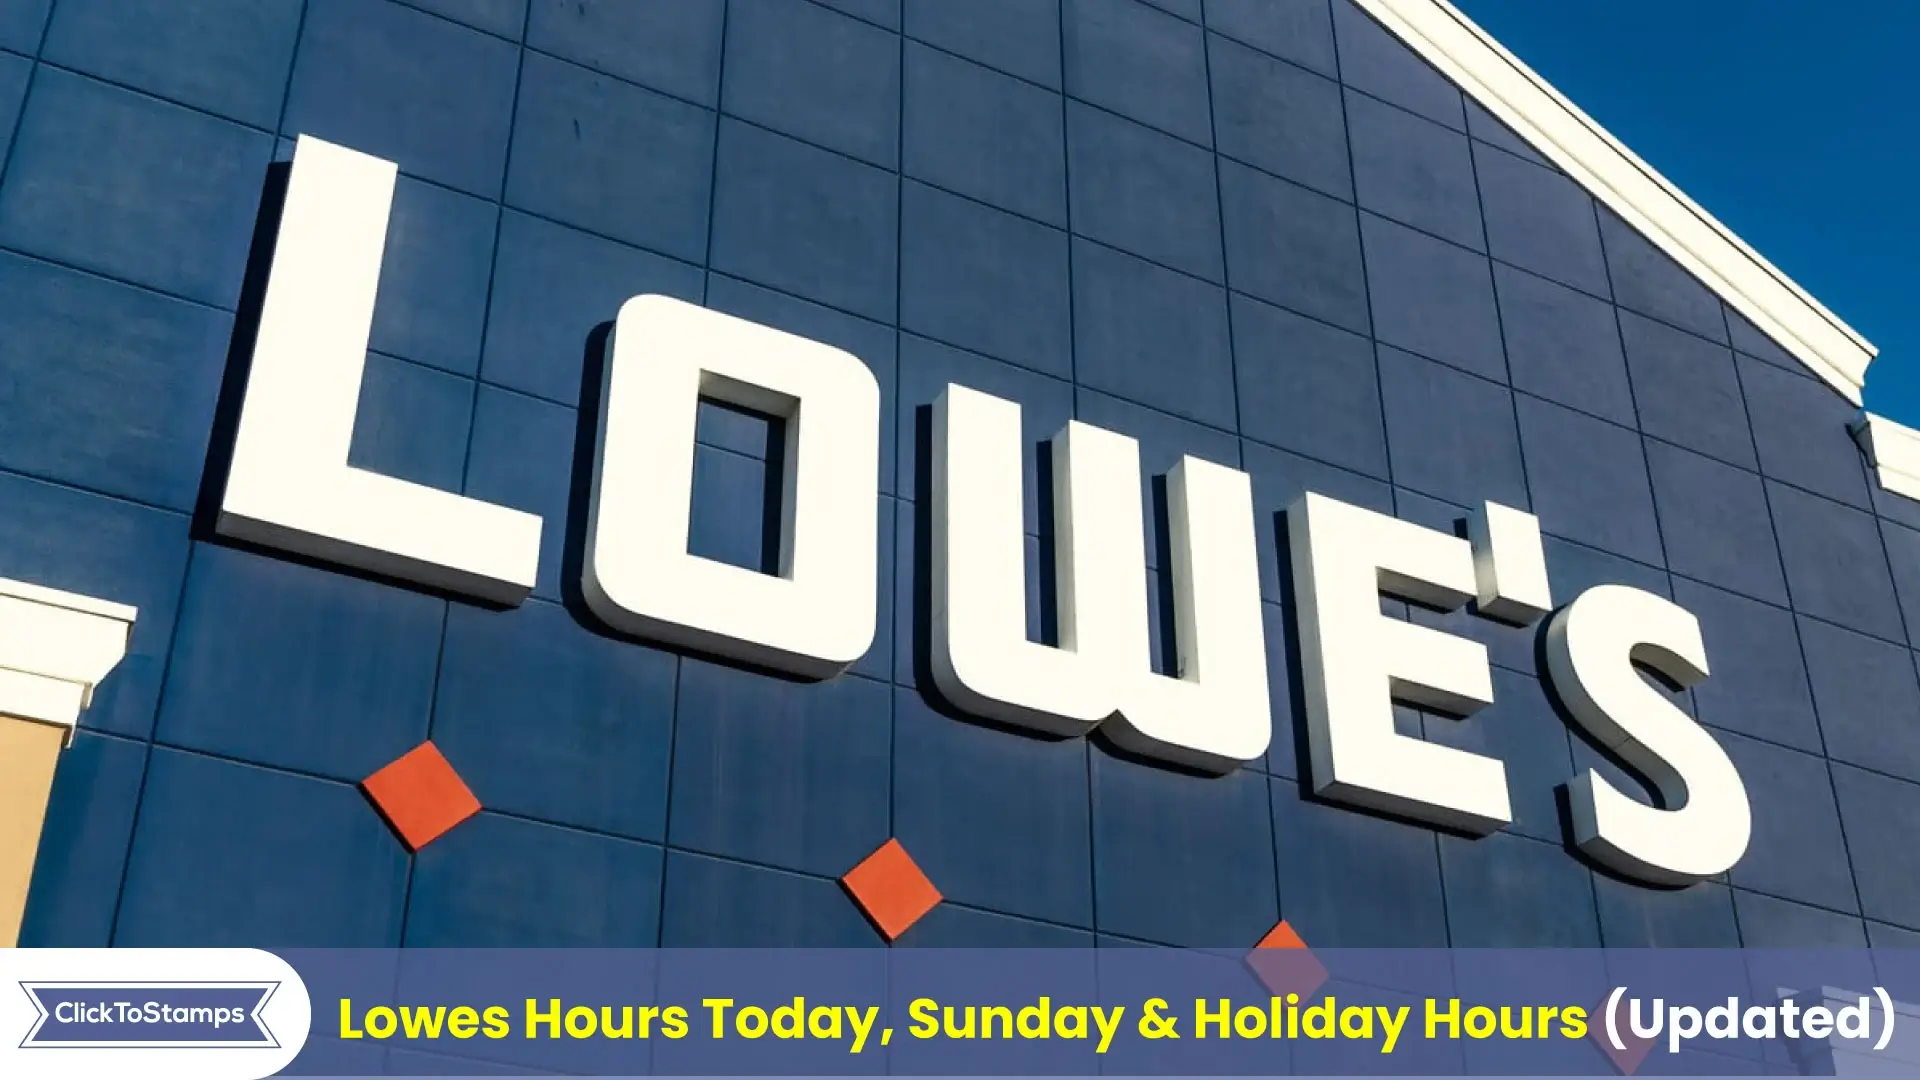 Lowes Hours Today